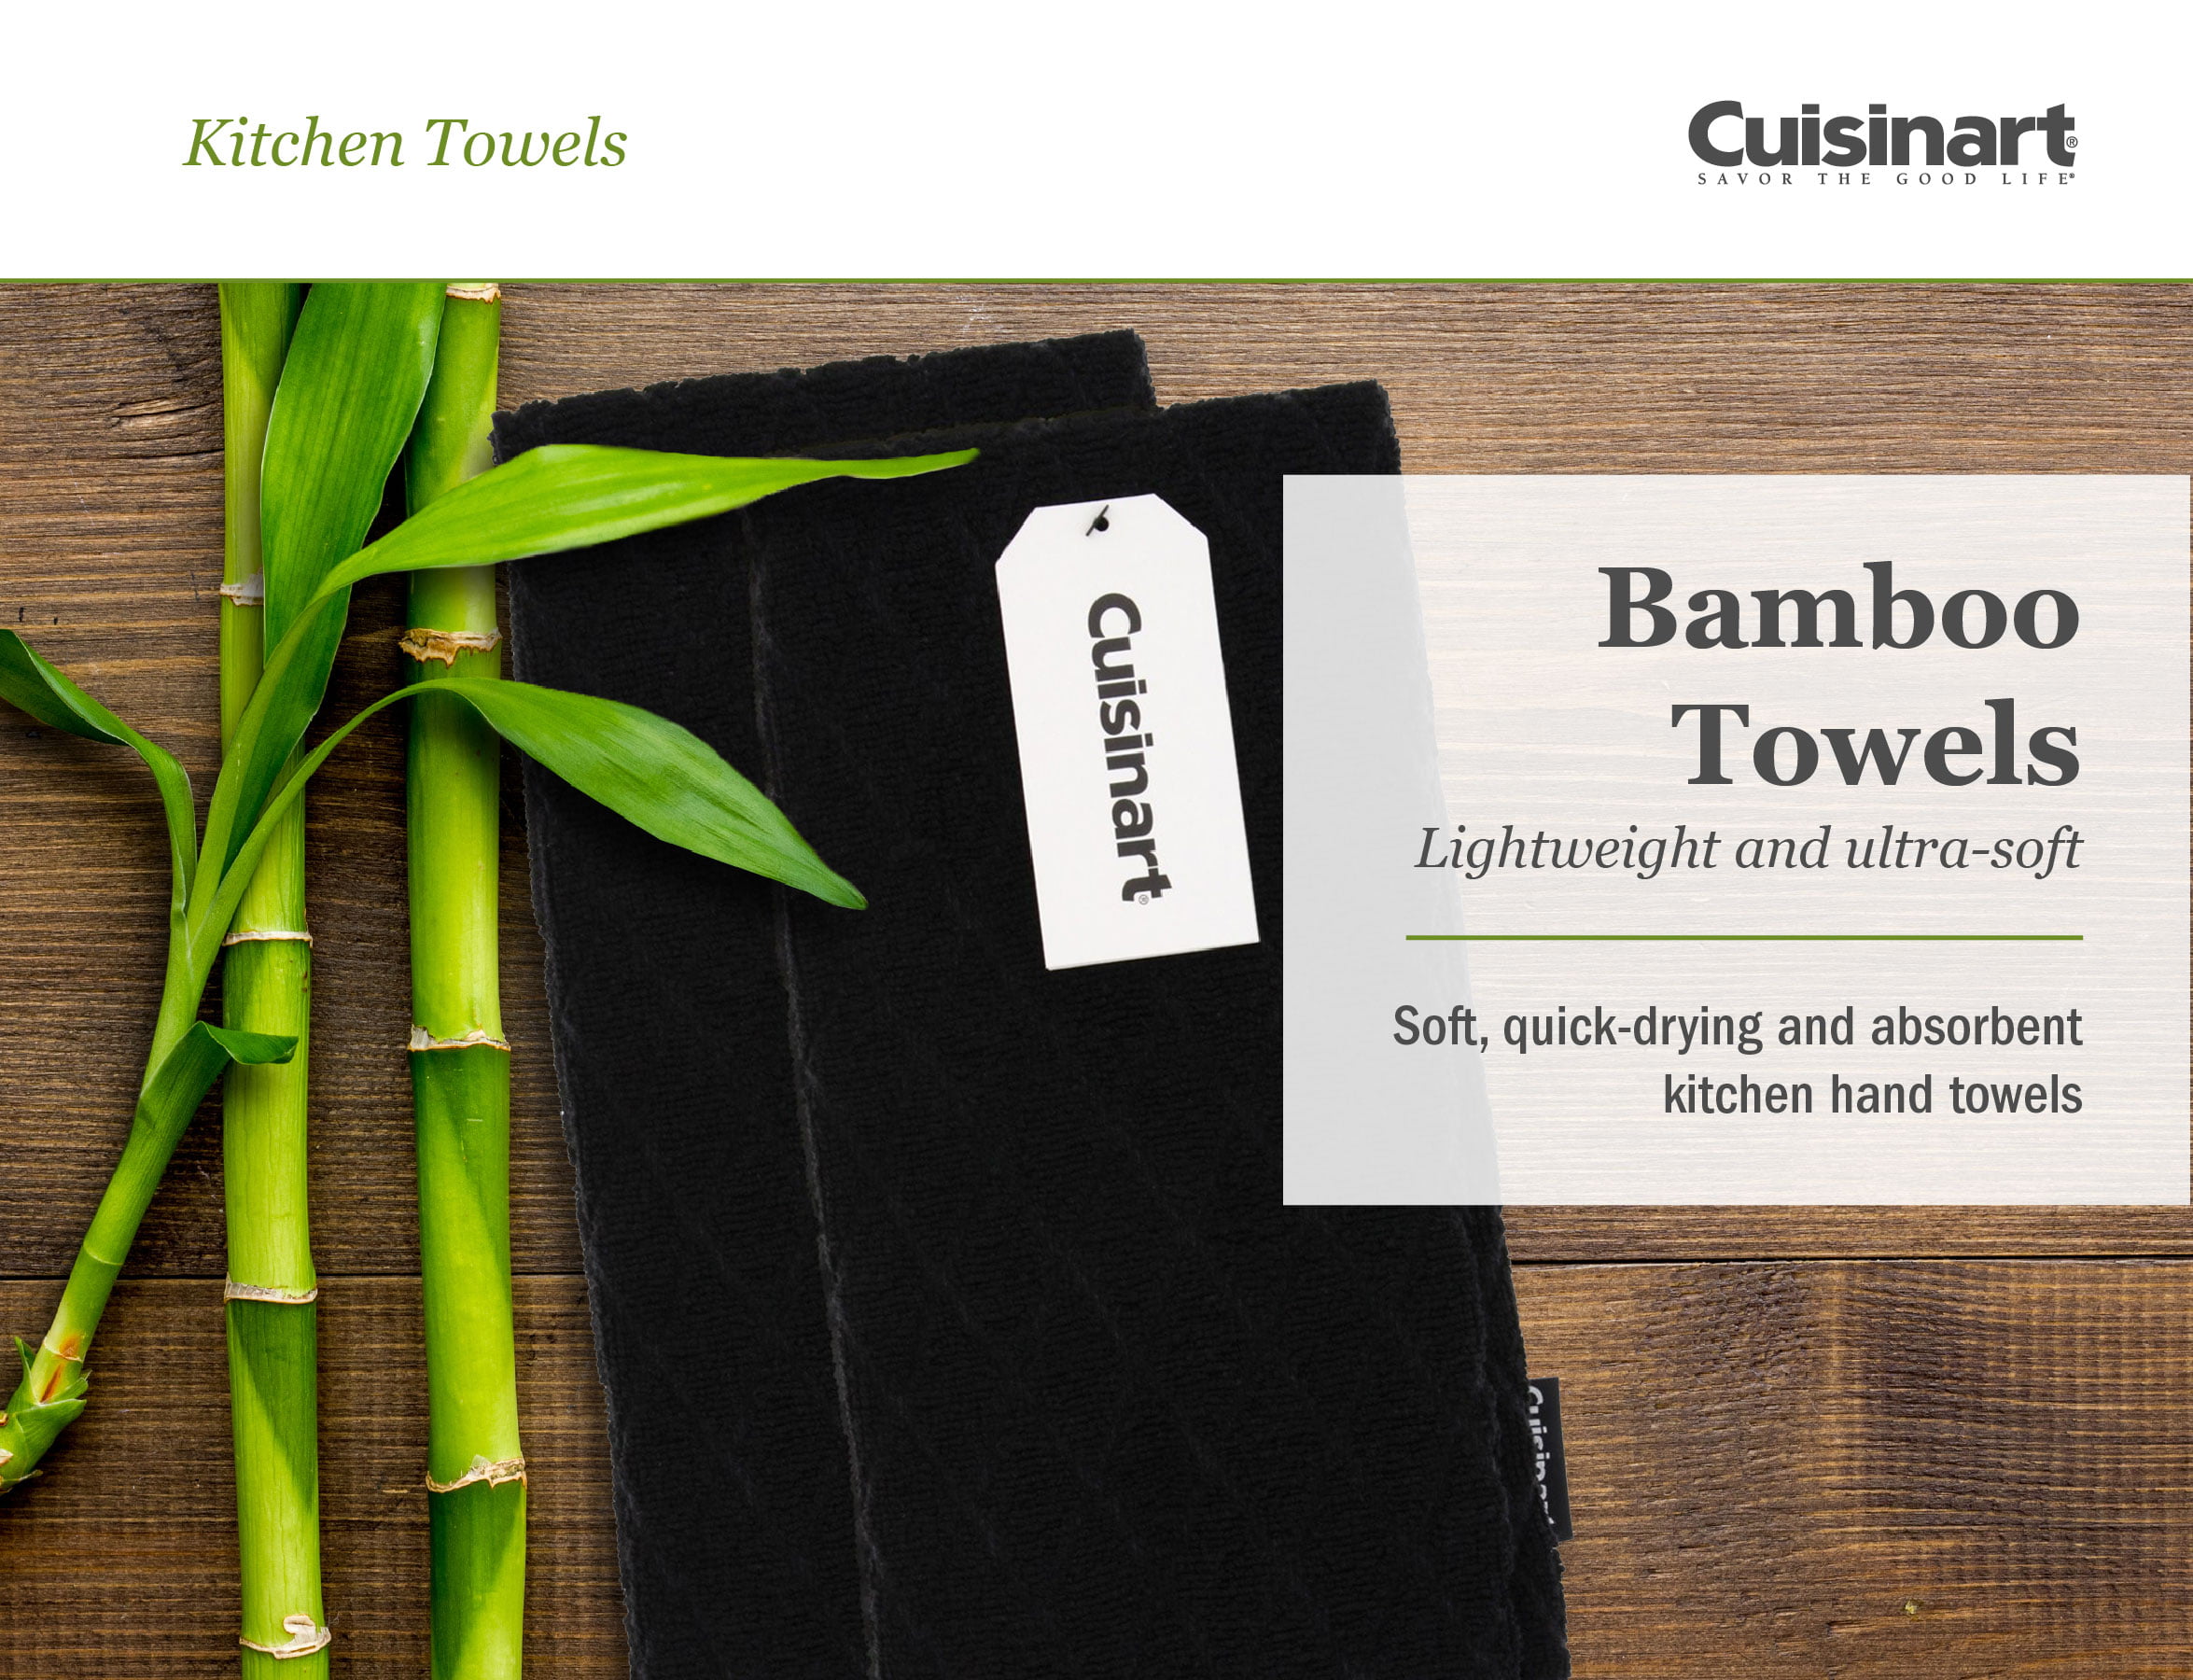 Cuisinart Bamboo Dish Towel Set-Kitchen and Hand Towels for Drying Dishes / Hands 2 Pack Bark-Effect Design Absorbent Drizzle Grey Soft and Anti-Microbial-Premium Bamboo / Cotton Blend 16 x 26